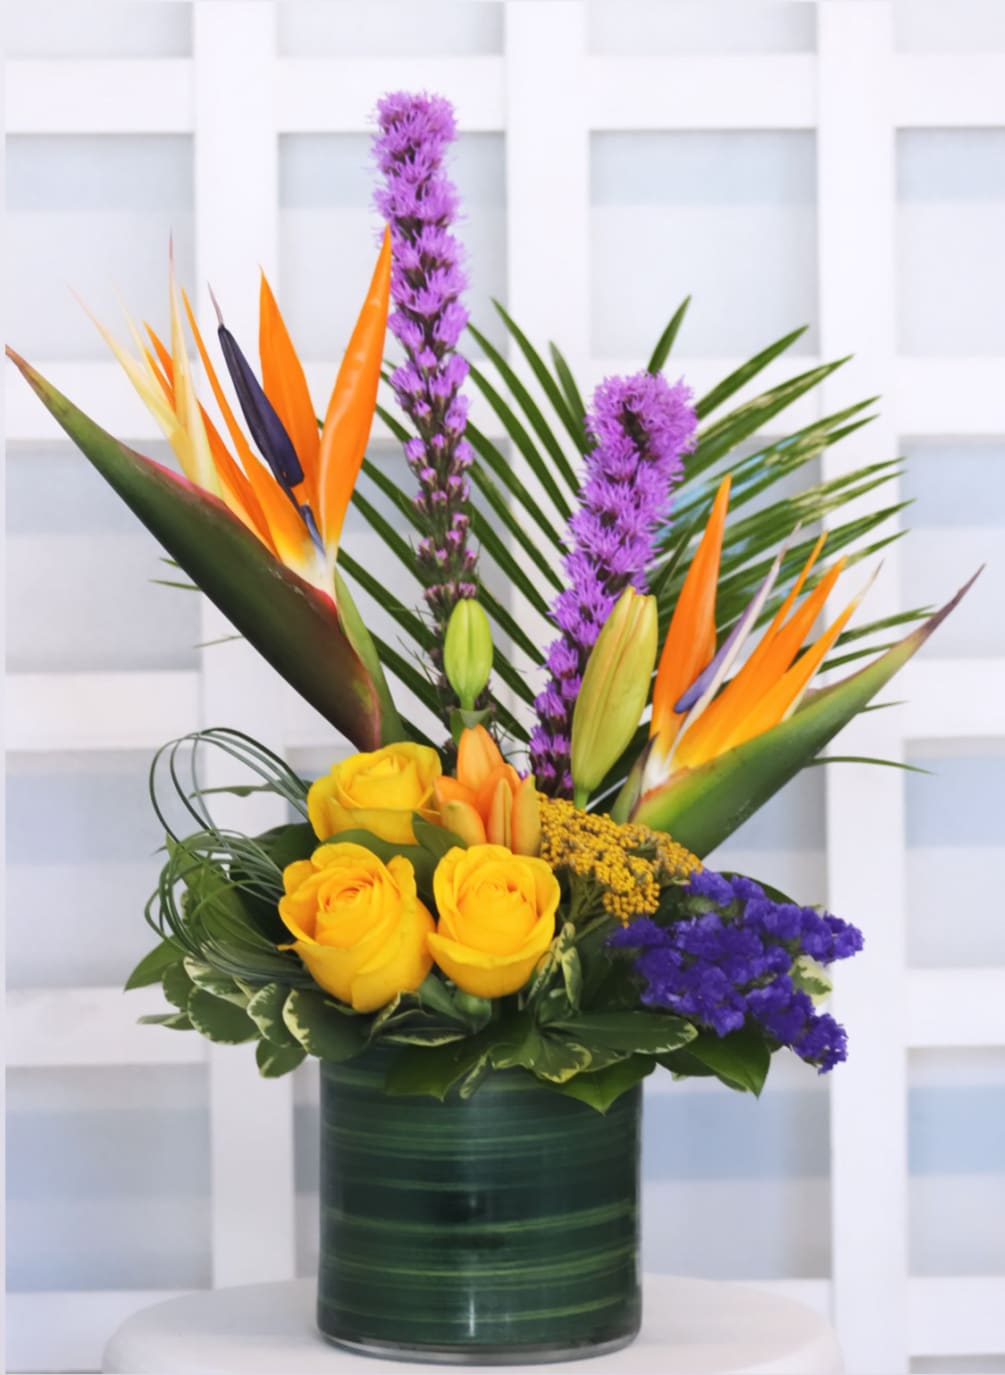 This unique tropical design includes Birds of paradise from Guatemala, yellow roses